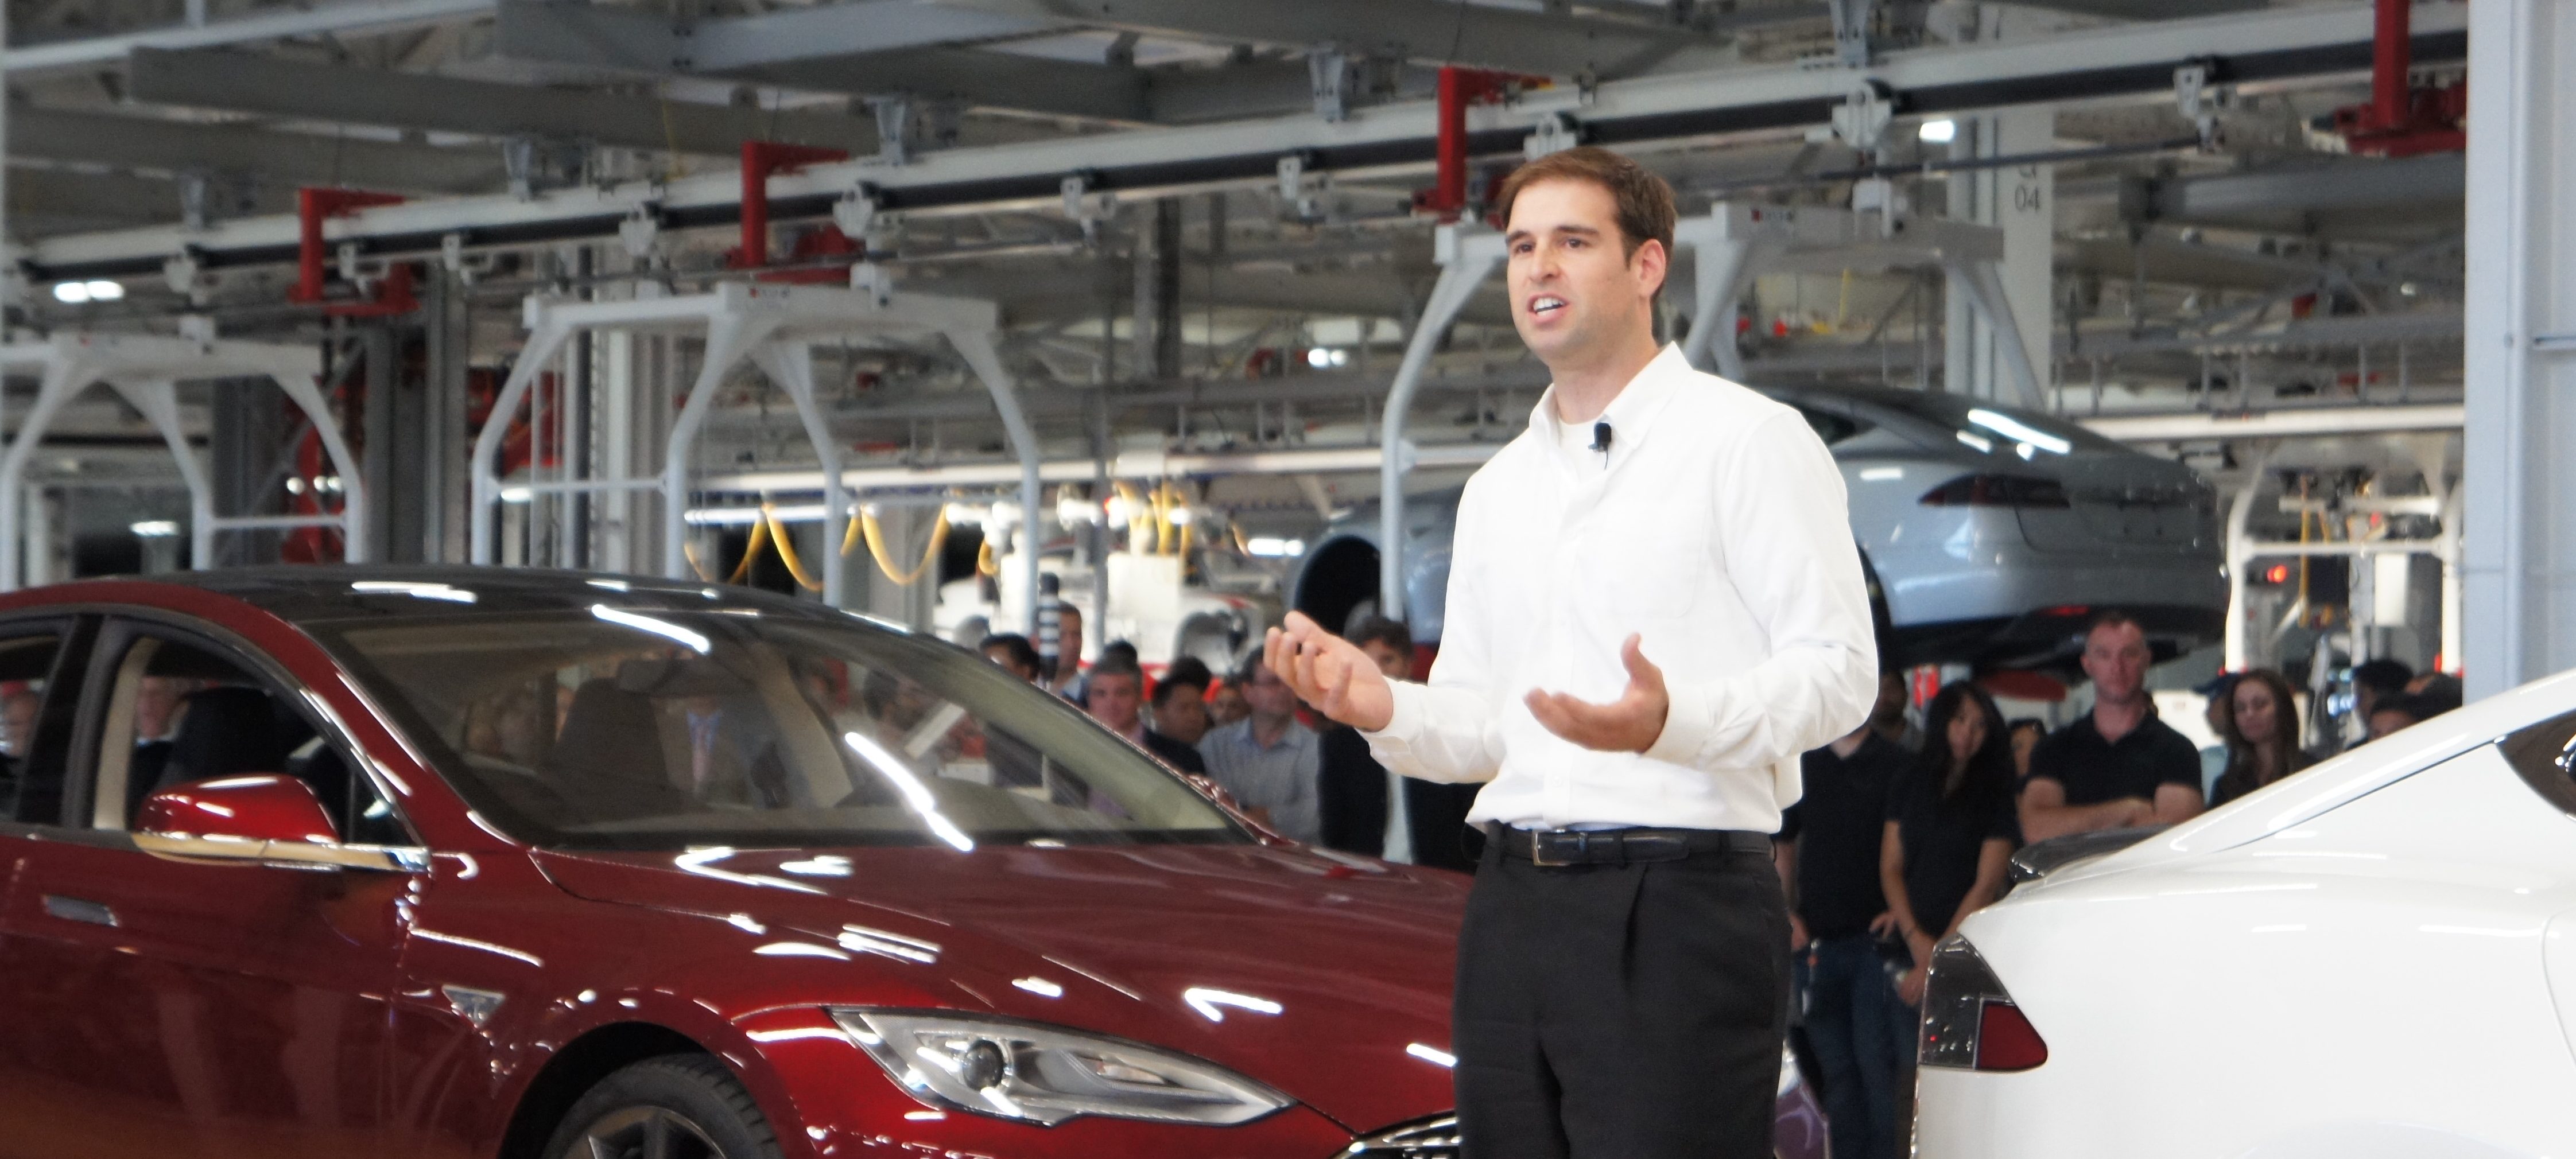 photo of Tesla co-founder JB Straubel receives backing from Amazon for battery material recycling venture image